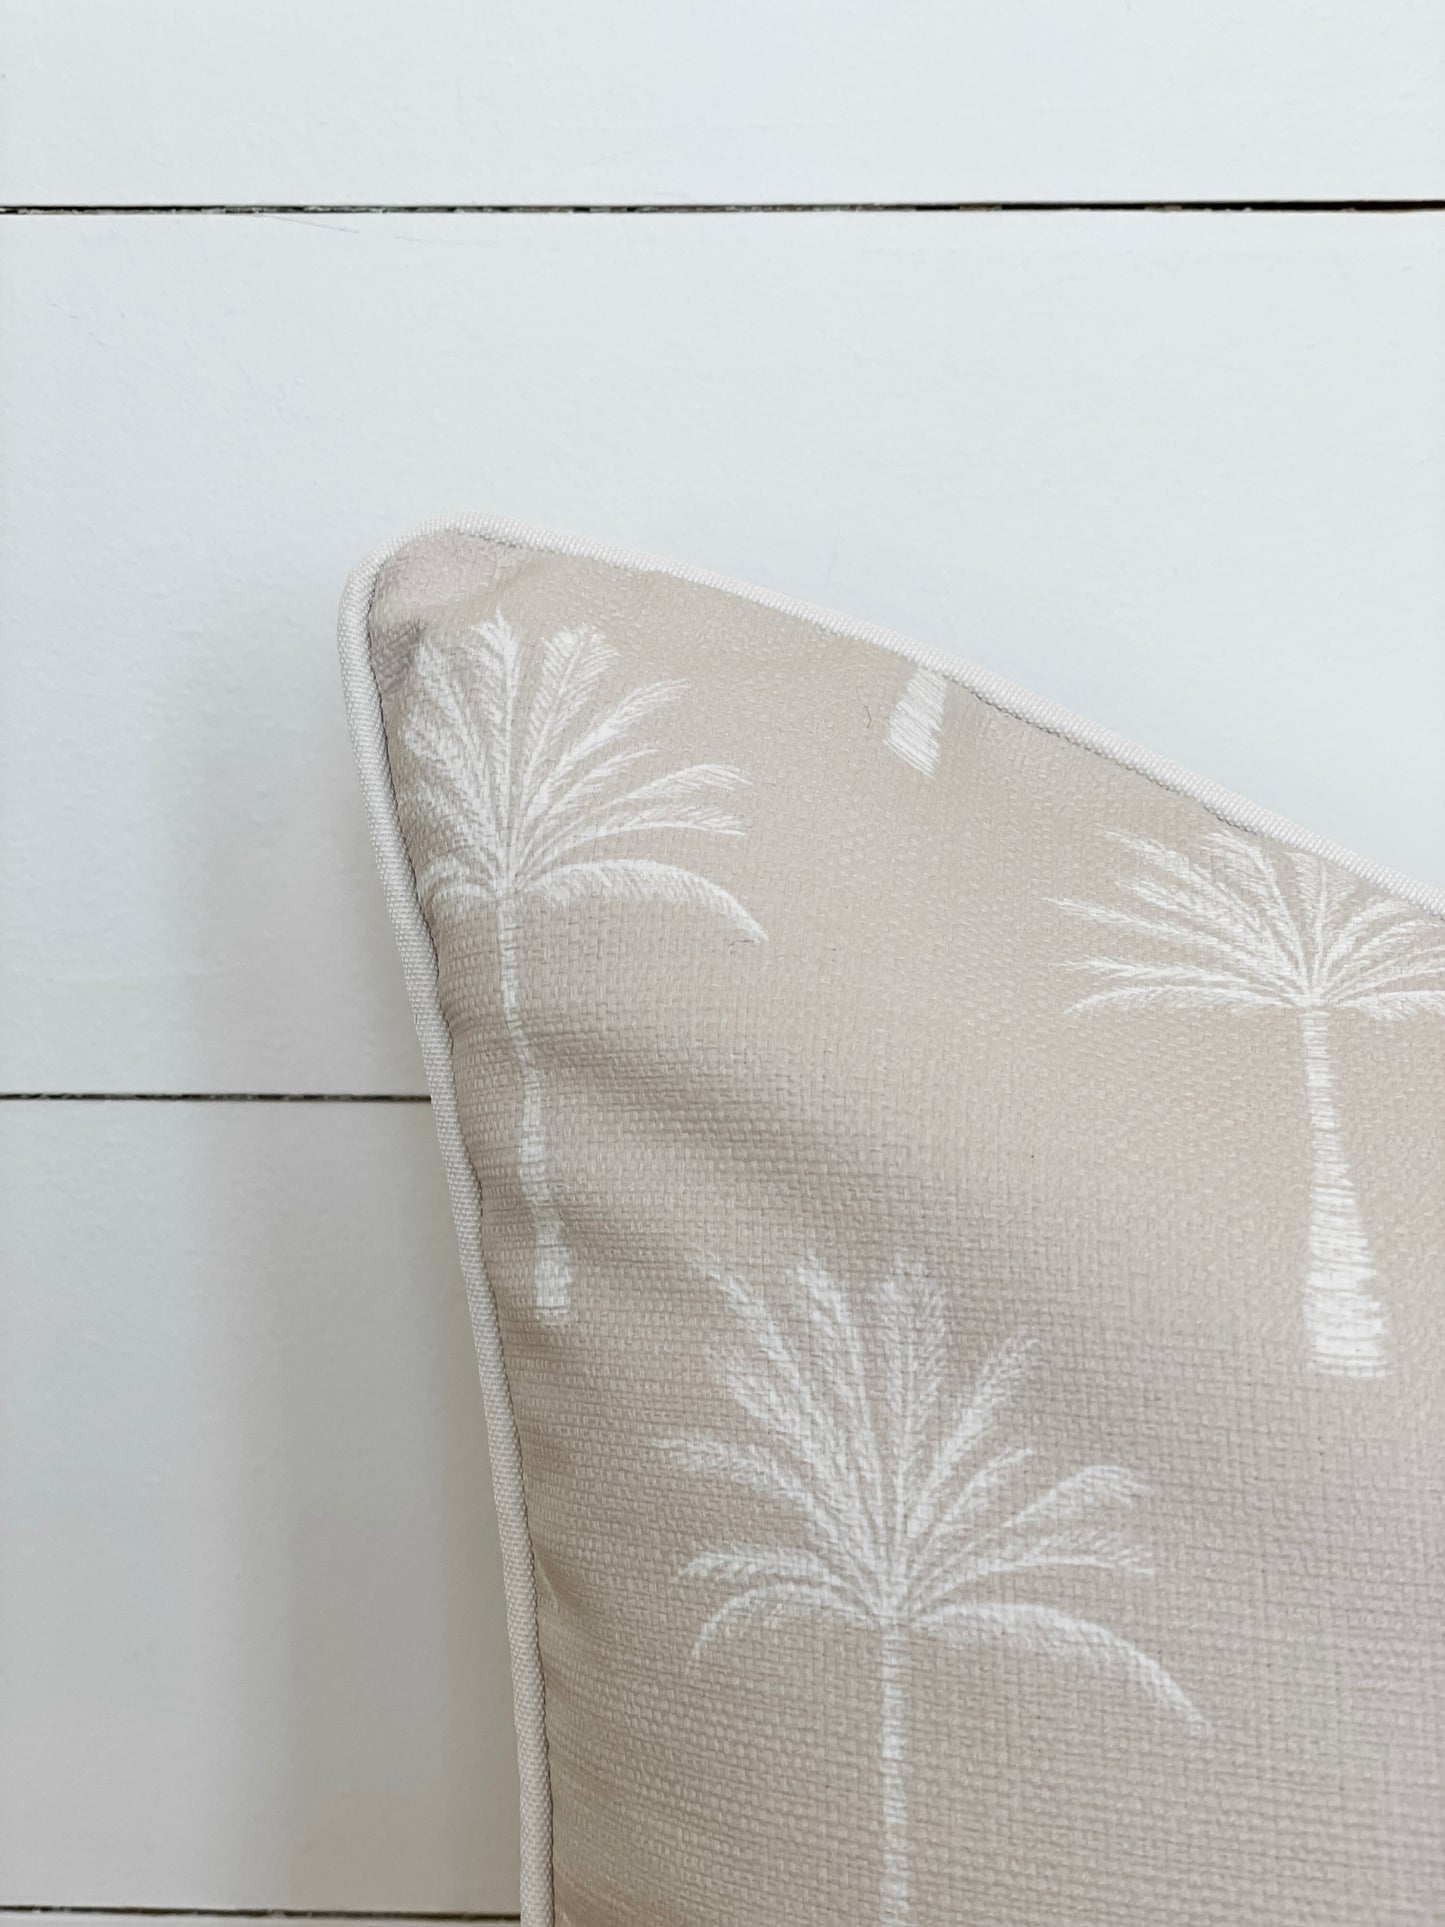 Outdoor Cushion Cover - Natural Palm